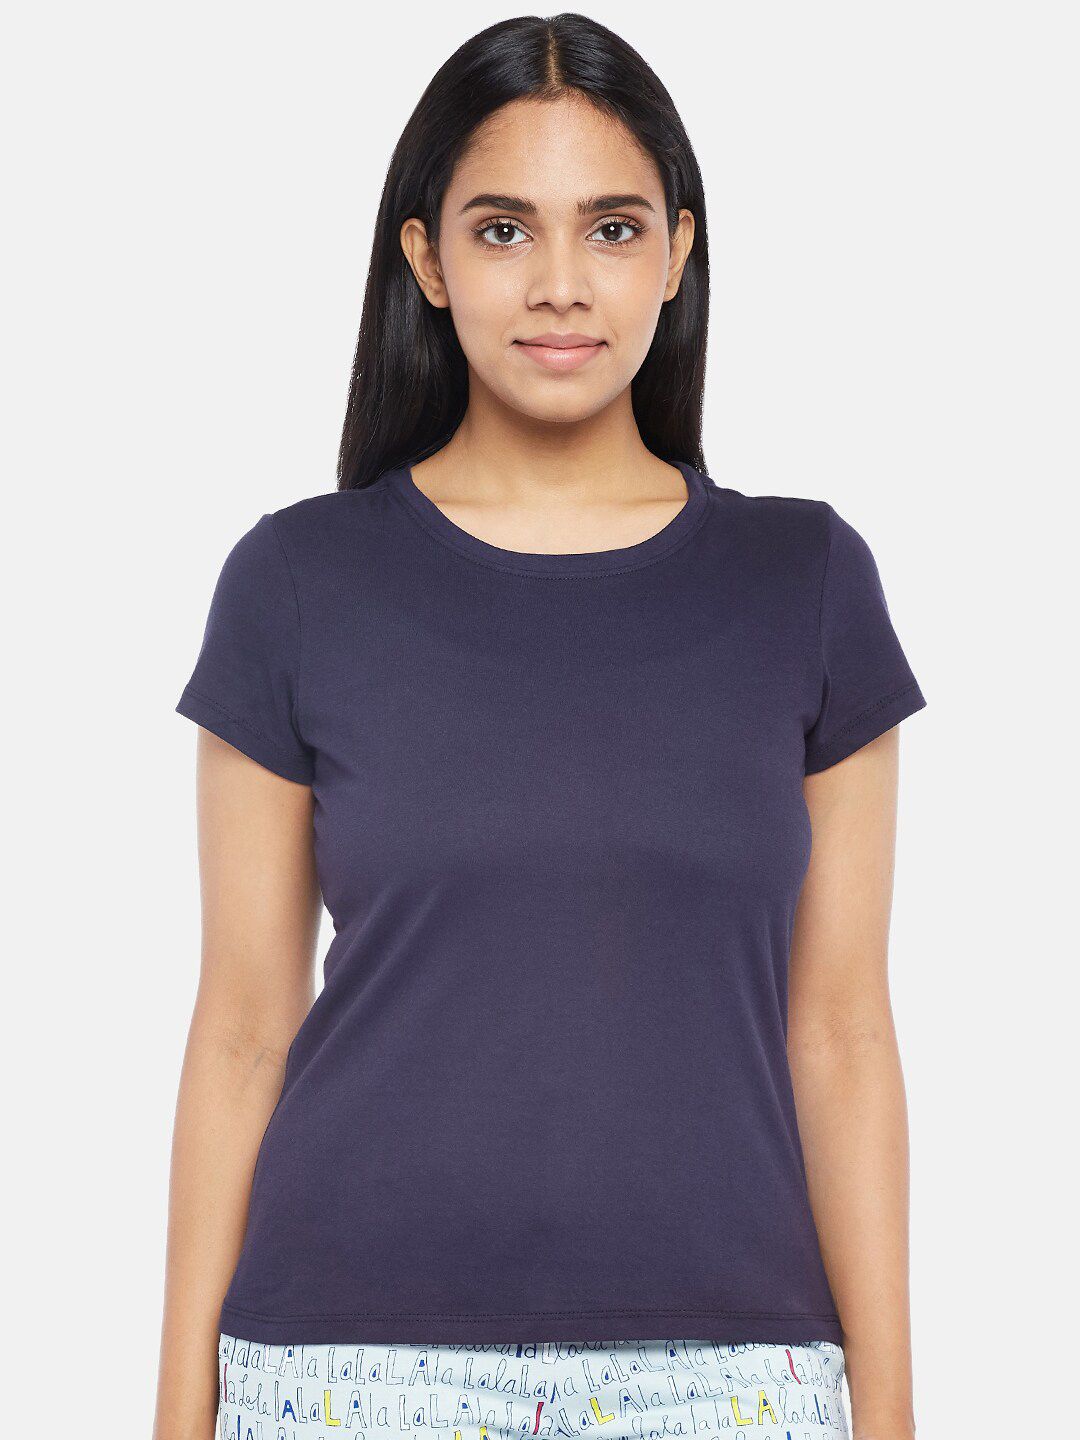 Dreamz by Pantaloons Navy Blue Solid Regular Pure Cotton Lounge T-shirt Price in India